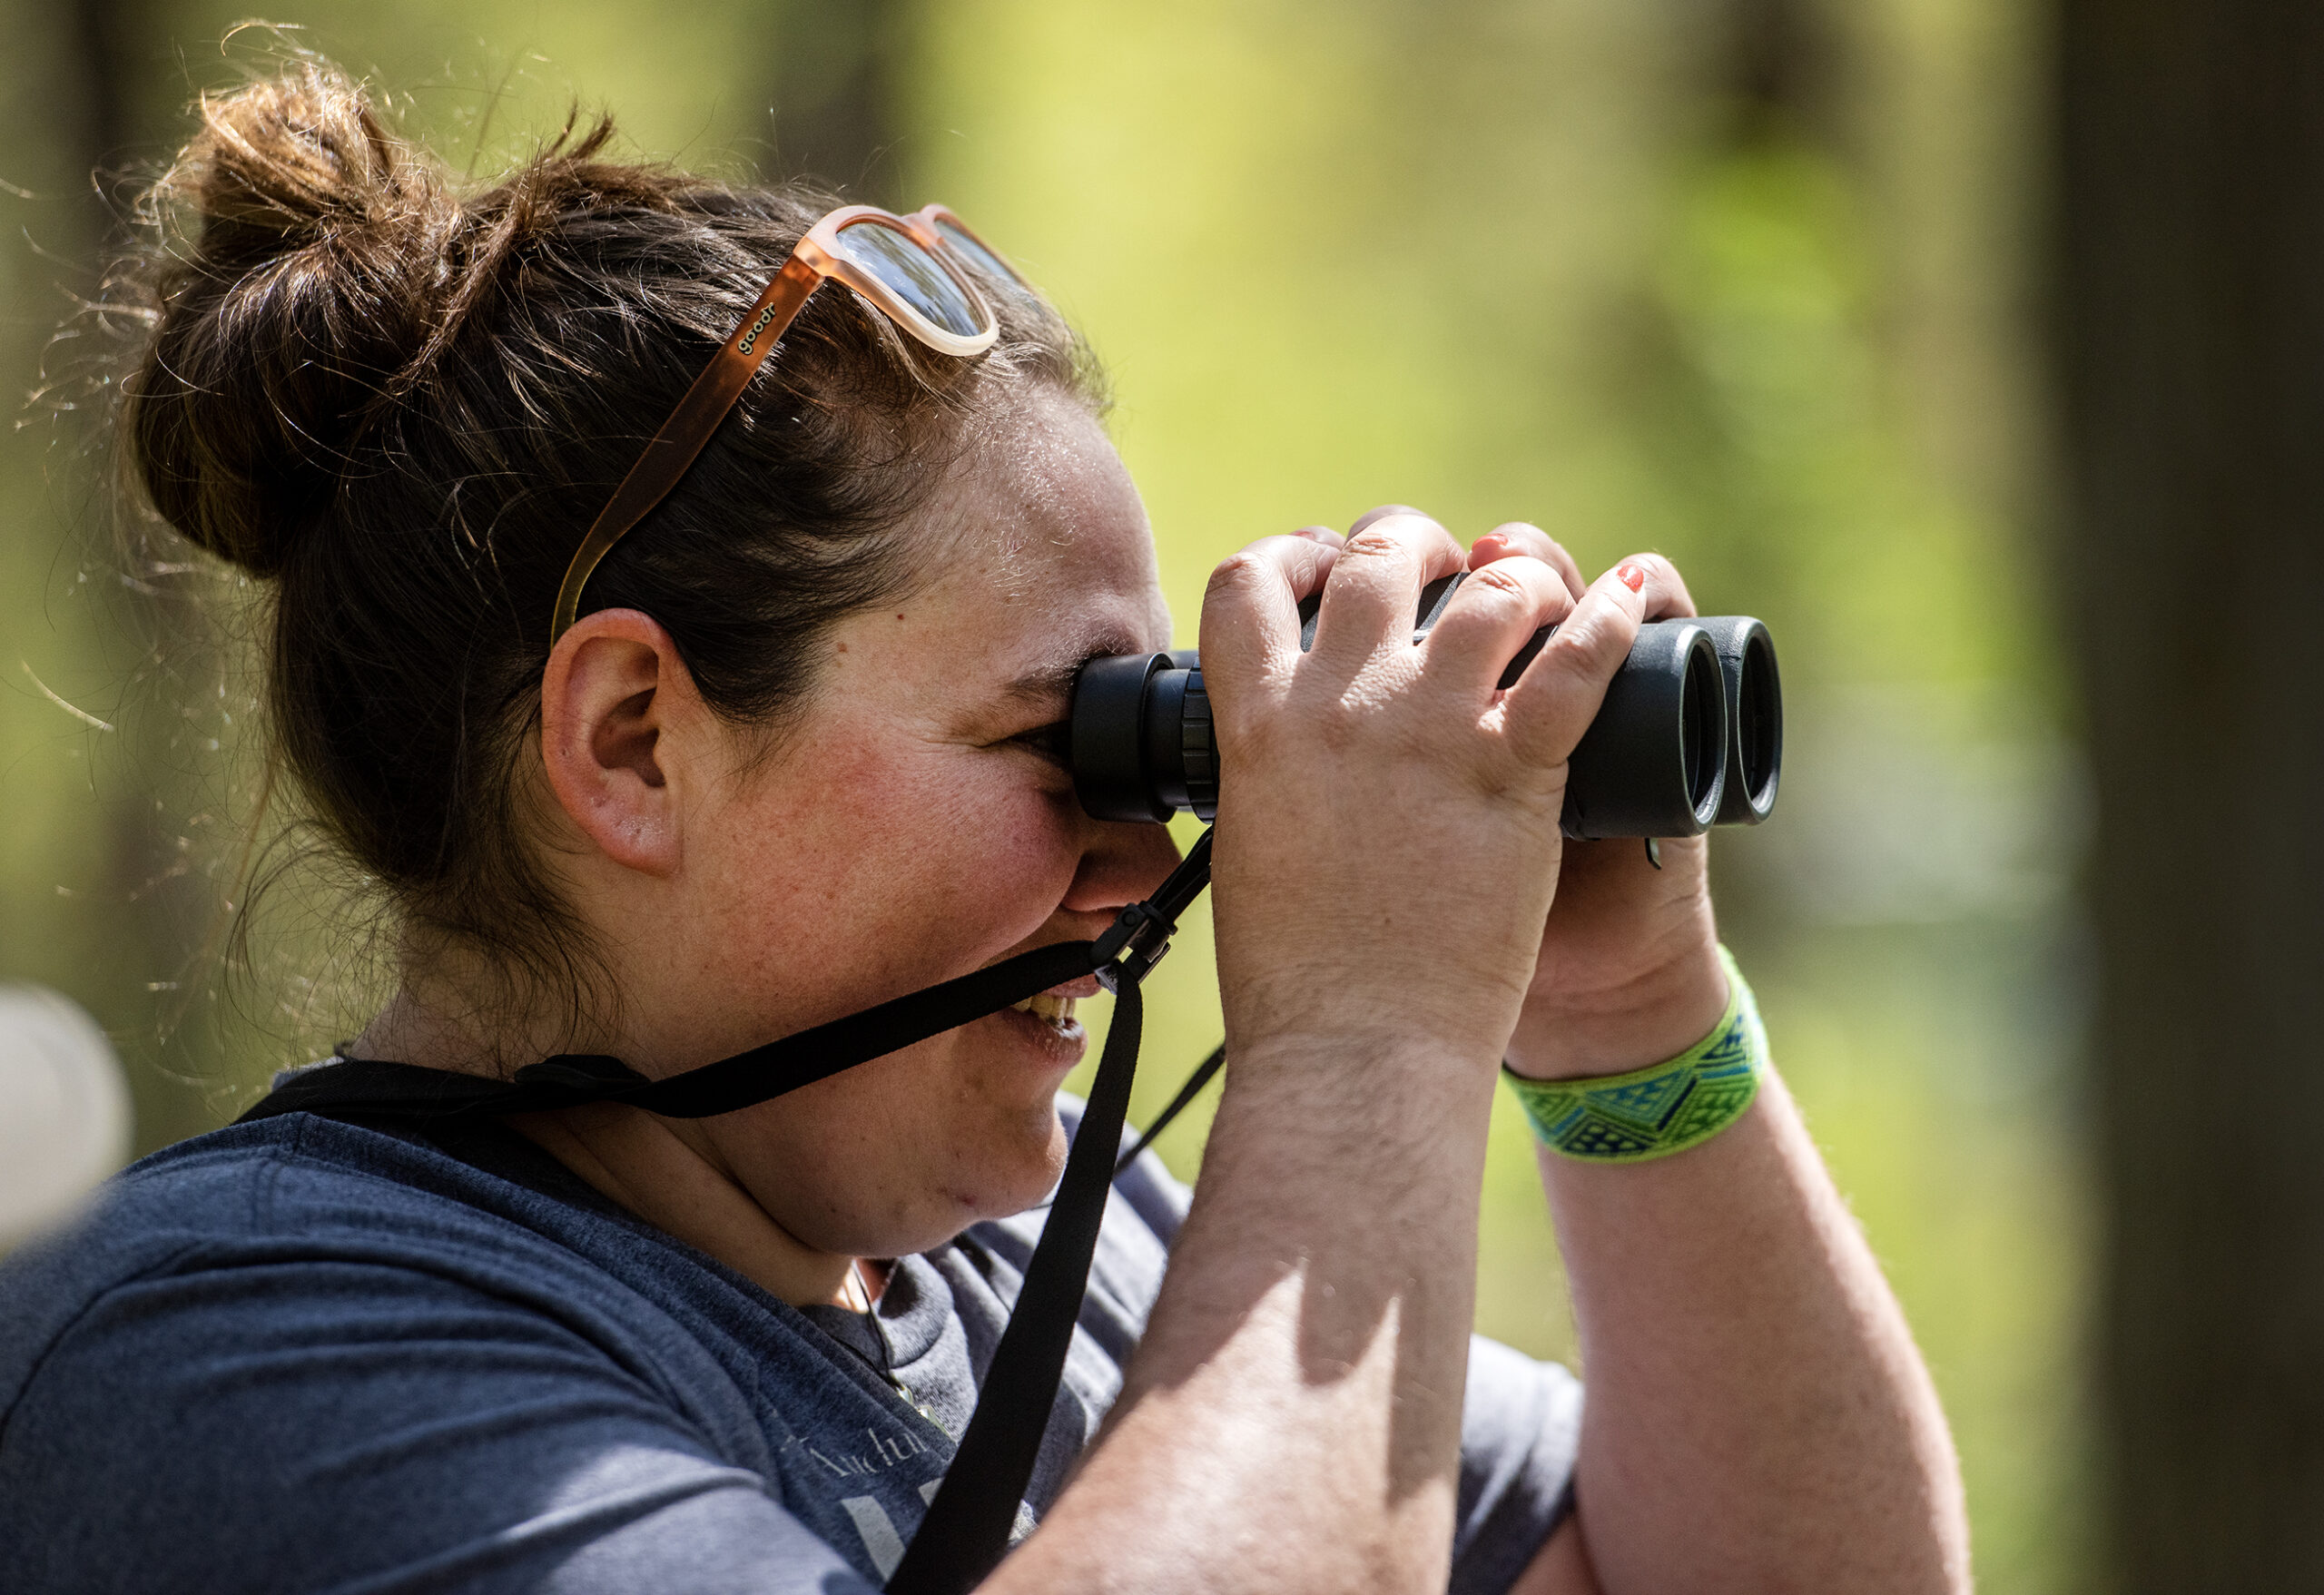 Kari Hagenow, a land steward and conservation project manager at The Nature Conservancy in Wisconsin, uses binoculars to find birds Wednesday, May 10, 2023, at Wyalusing State Park in Bagley, Wis. (Angela Major/WPR)